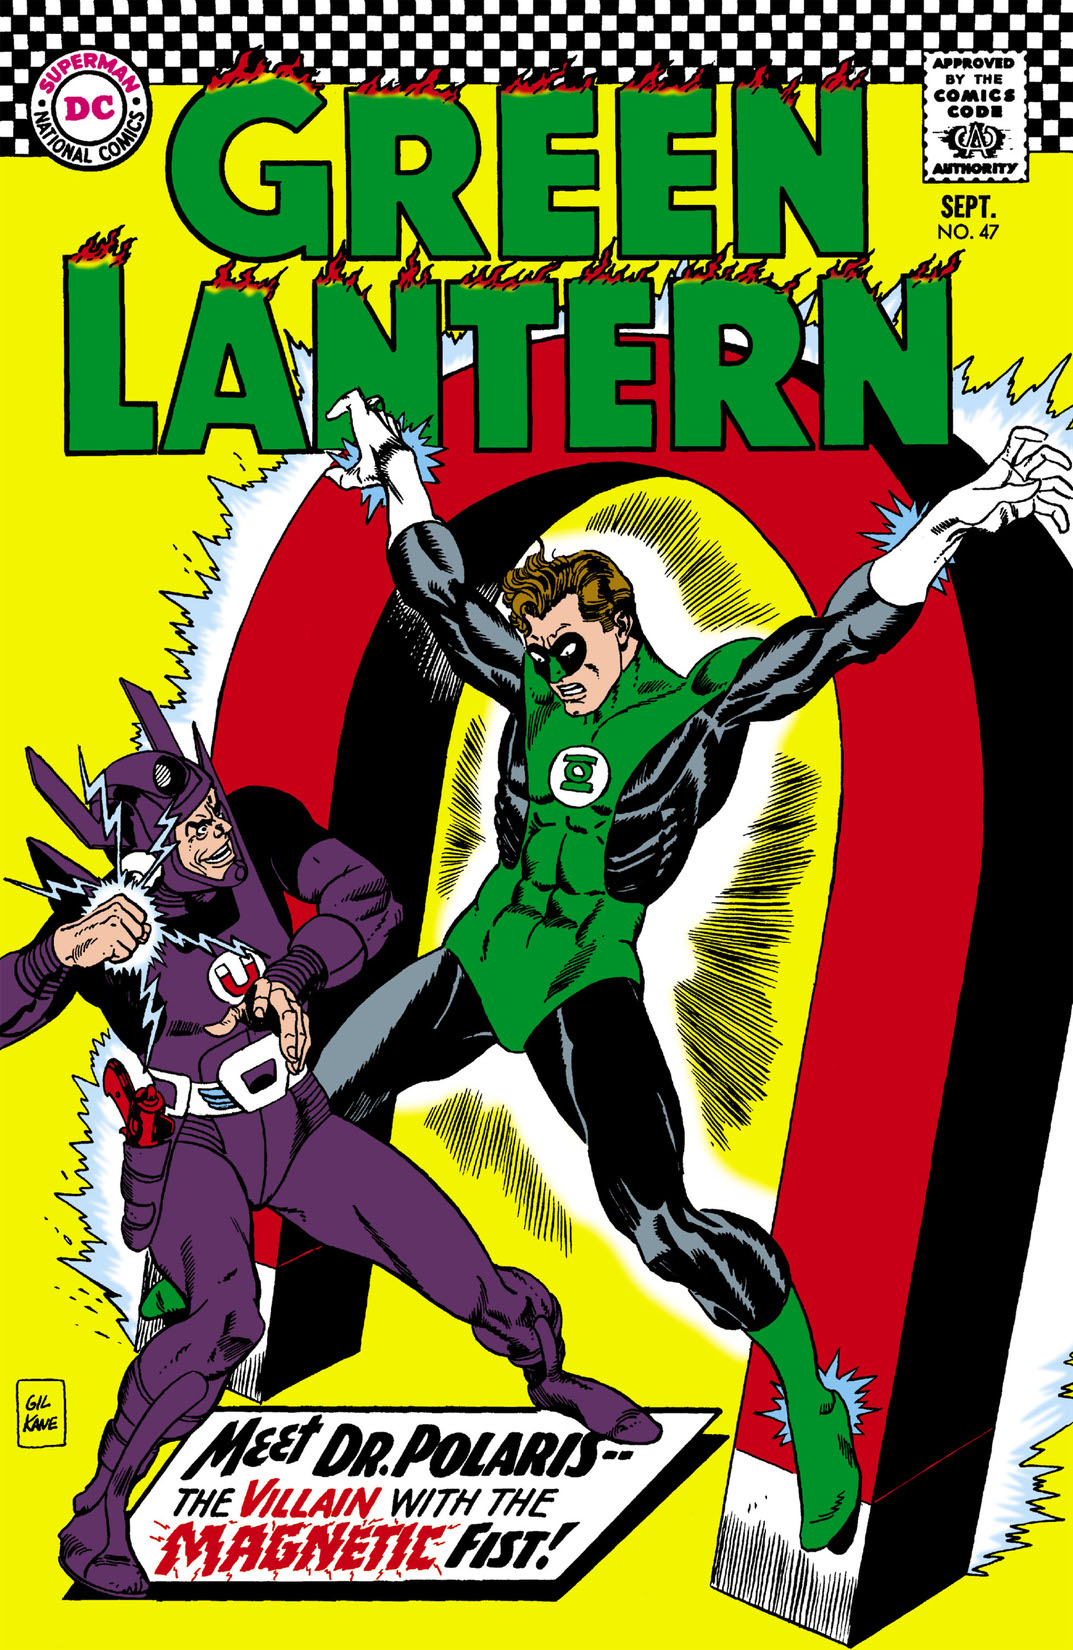 Green Lantern (1960-) #47 preview images